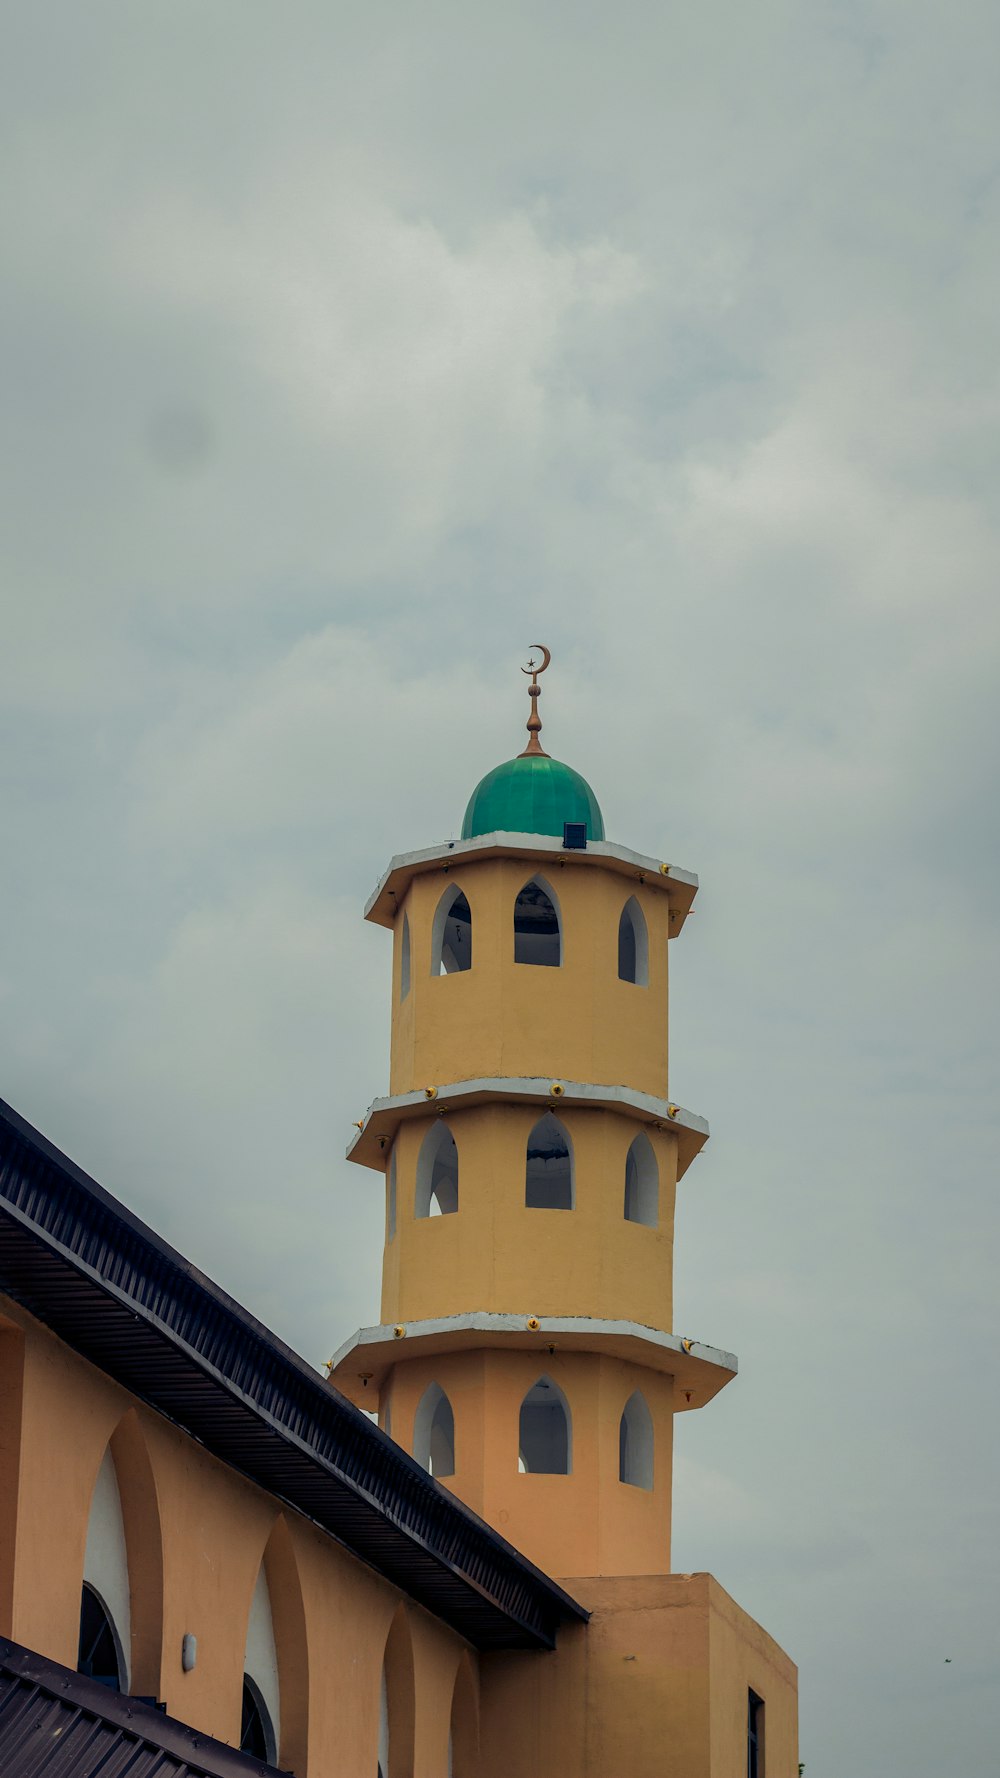 a tall yellow tower with a green top